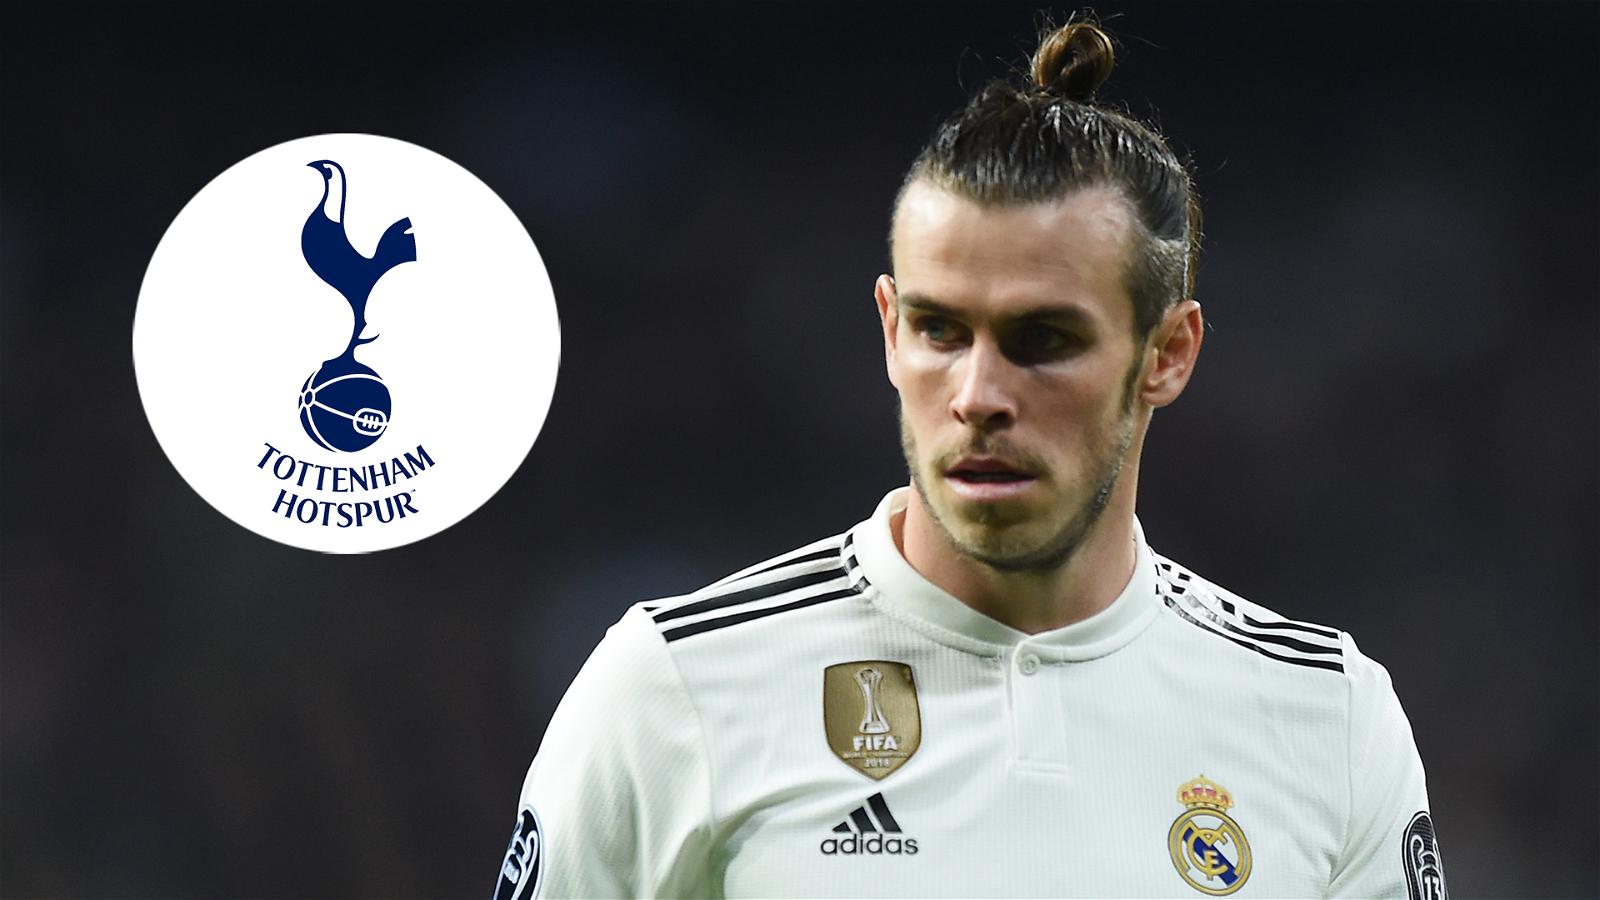 Bale scores winner as Spurs go second with win over Brighton